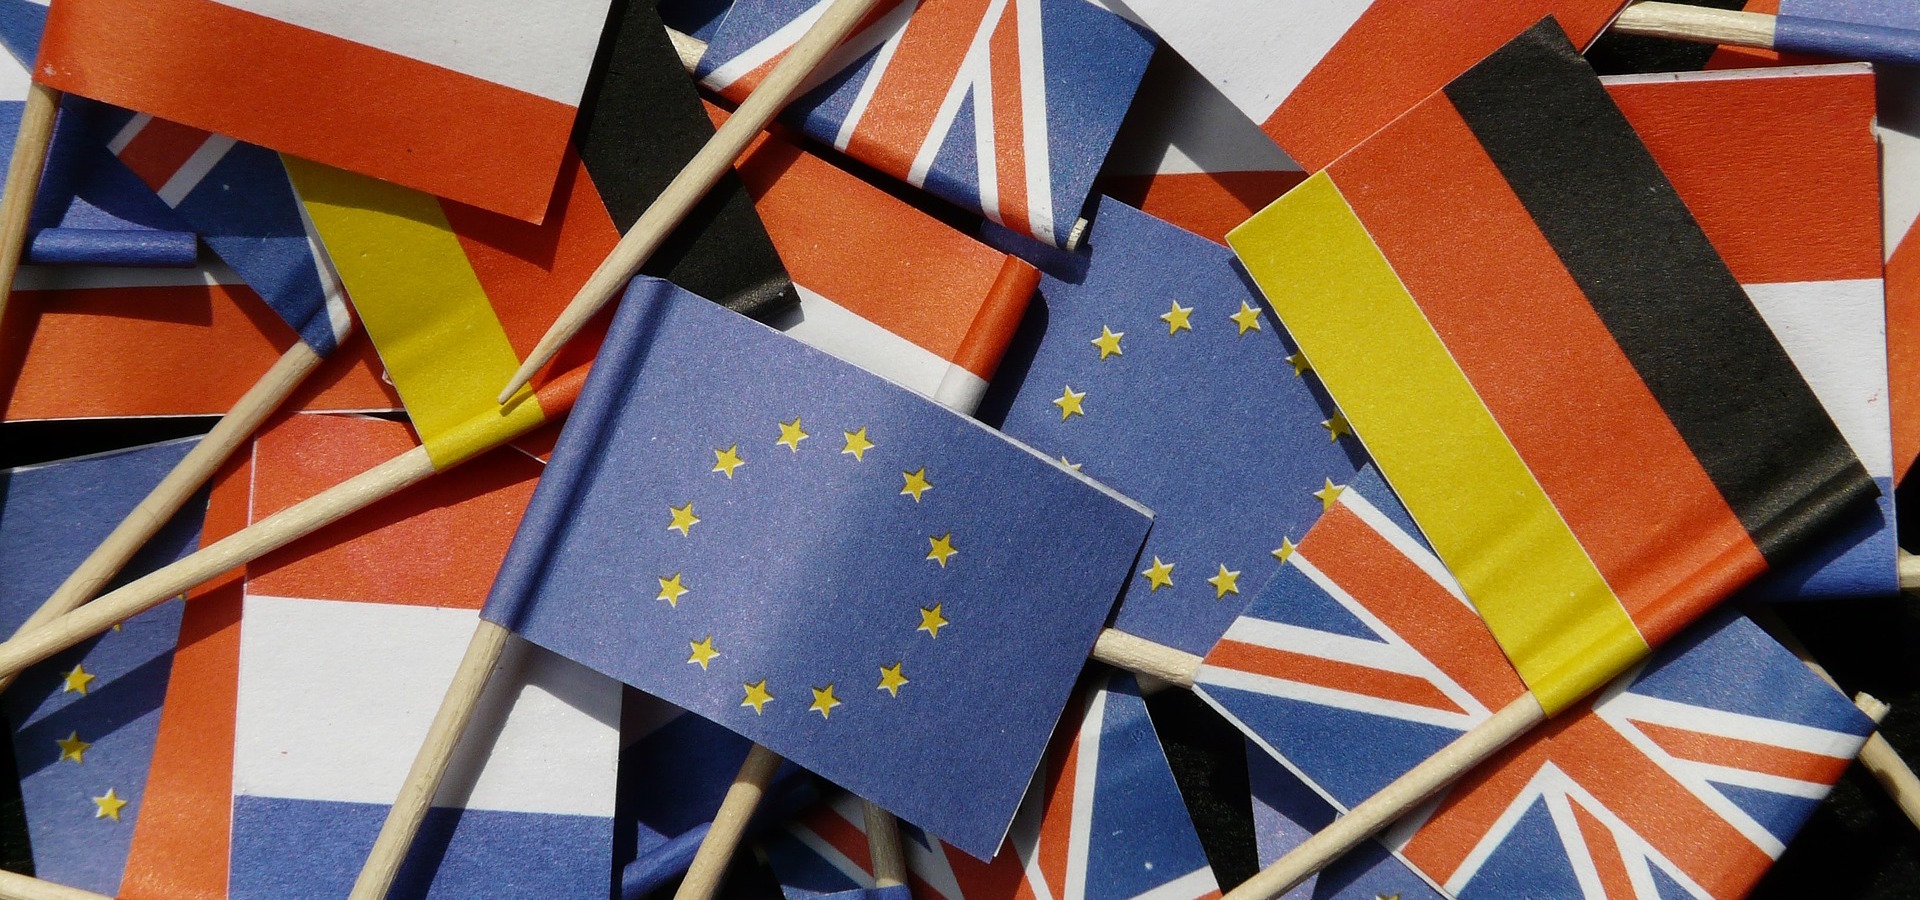 A pile of small paper flags from the EU, Germany, France and the UK